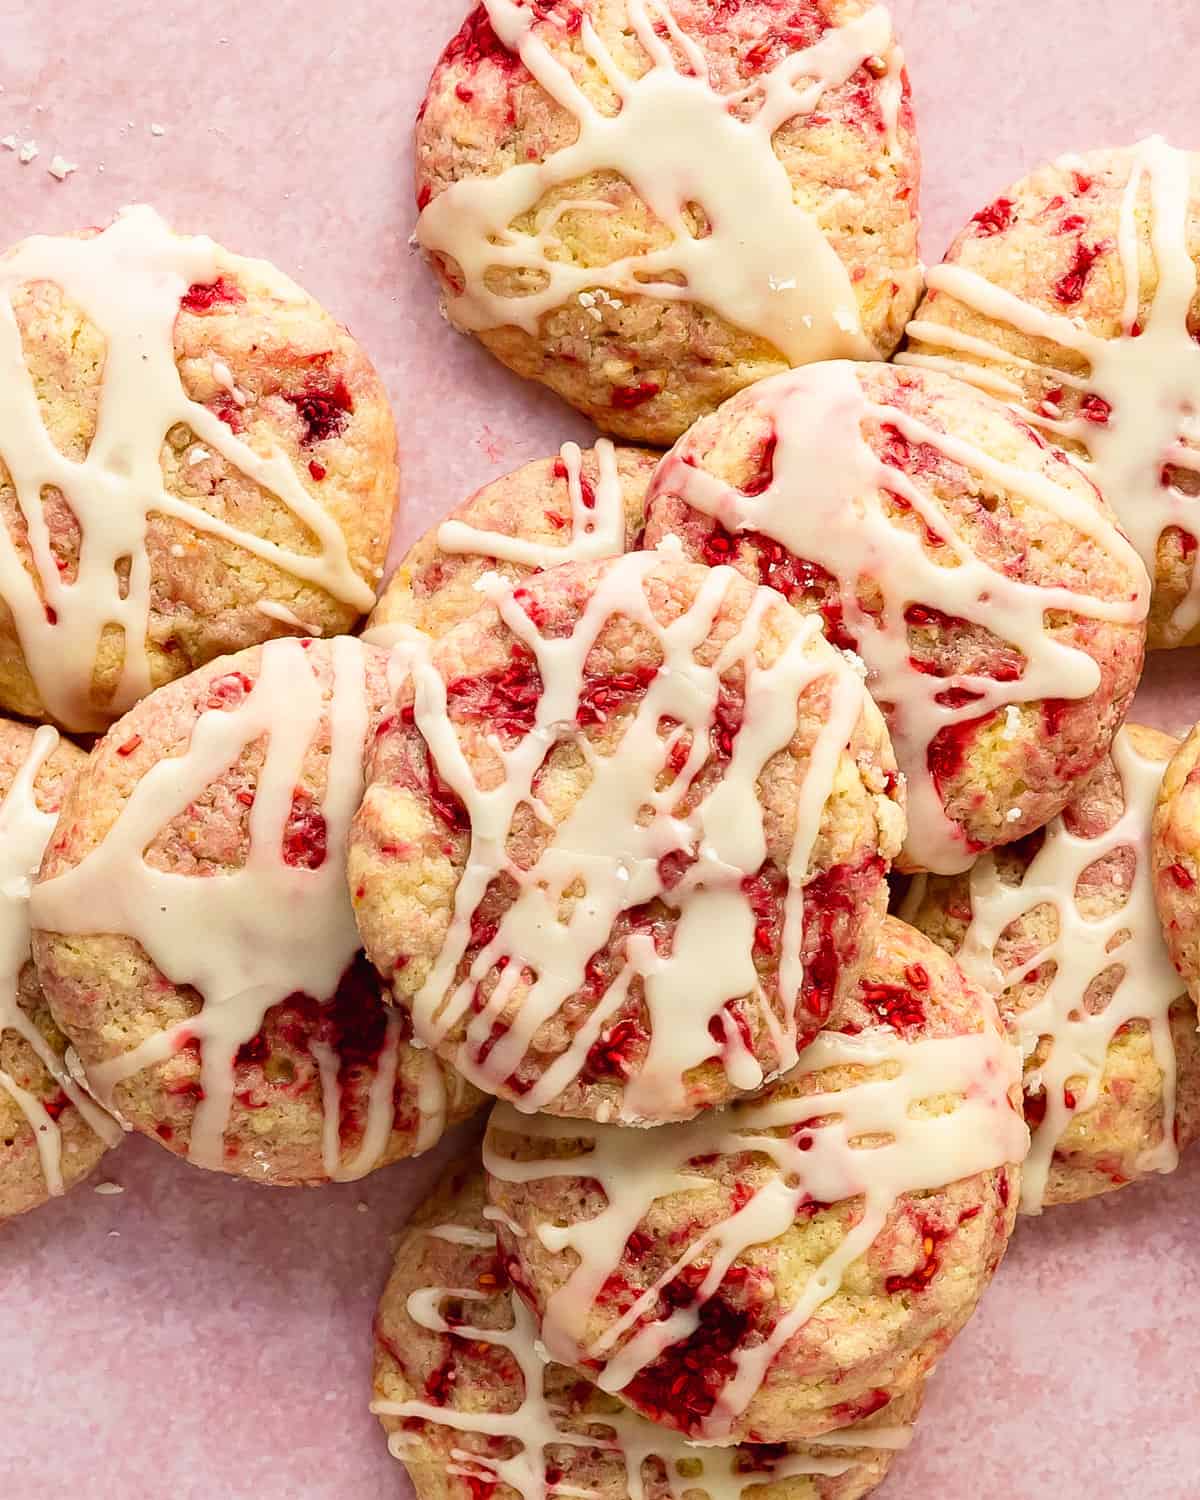 Lemon raspberry cookies are sweet. buttery, soft and fluffy lemon cookies filled with swirls of tart raspberries. Top these raspberry lemon cookies with a fresh lemon glaze for even more lemon flavor. This lemon and raspberry cookie recipe is no chill and easy to make in one bowl. 